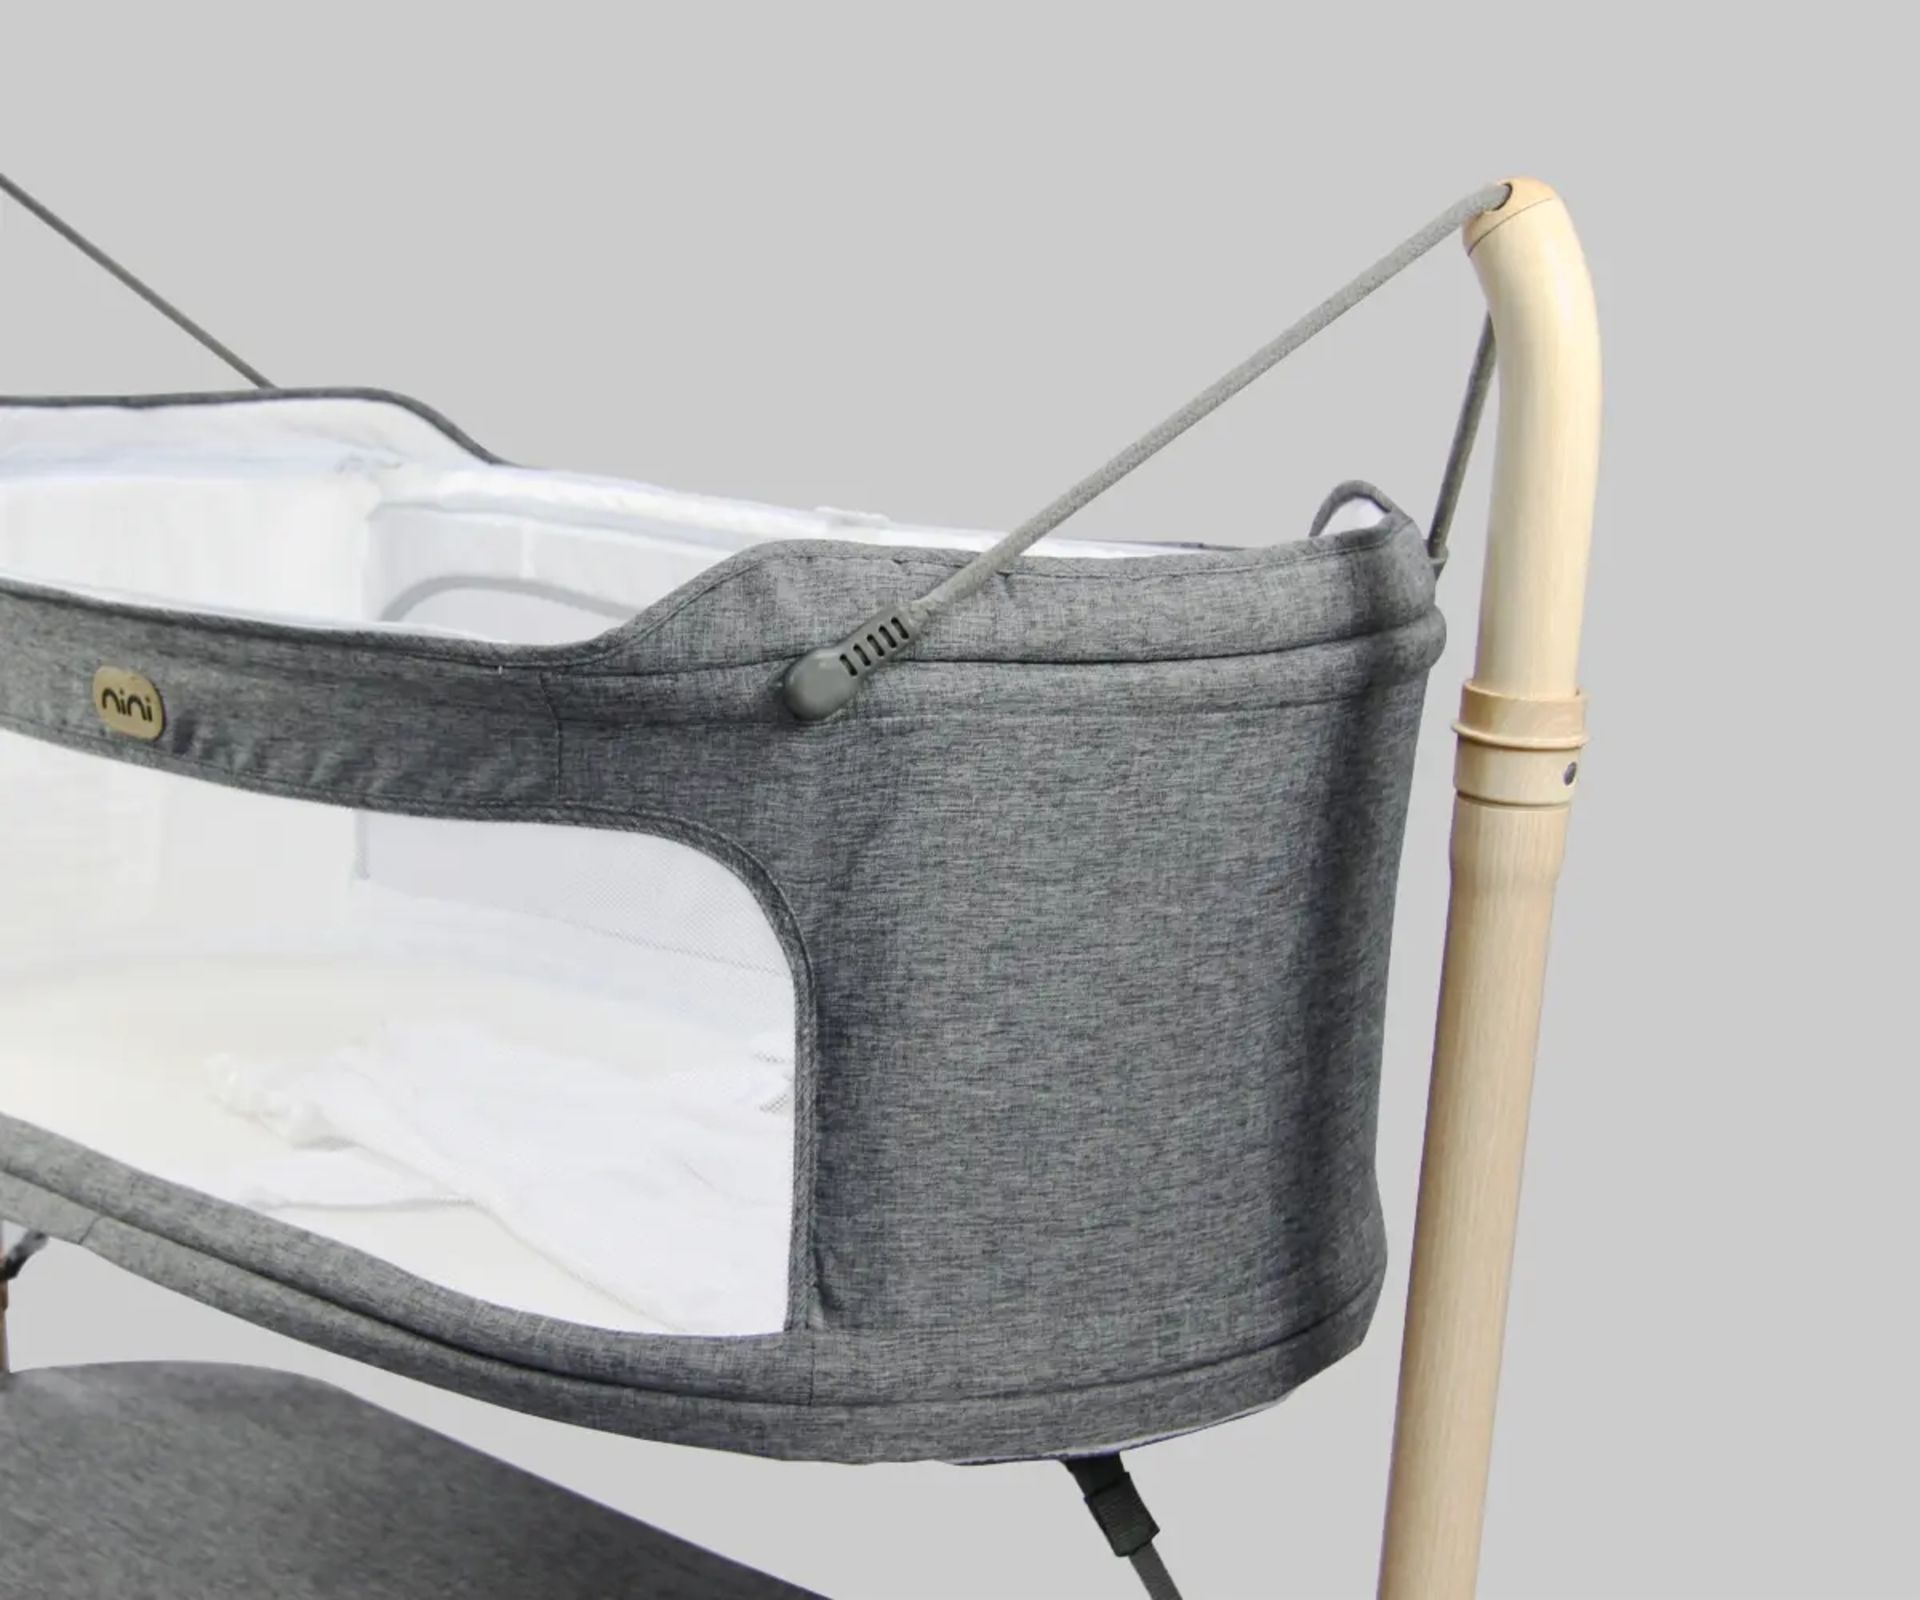 Trade Lot 5 x New & Boxed NiniPod Luxury Childrens Cot. RRP £299. • Calming swinging & bouncing - Image 2 of 4